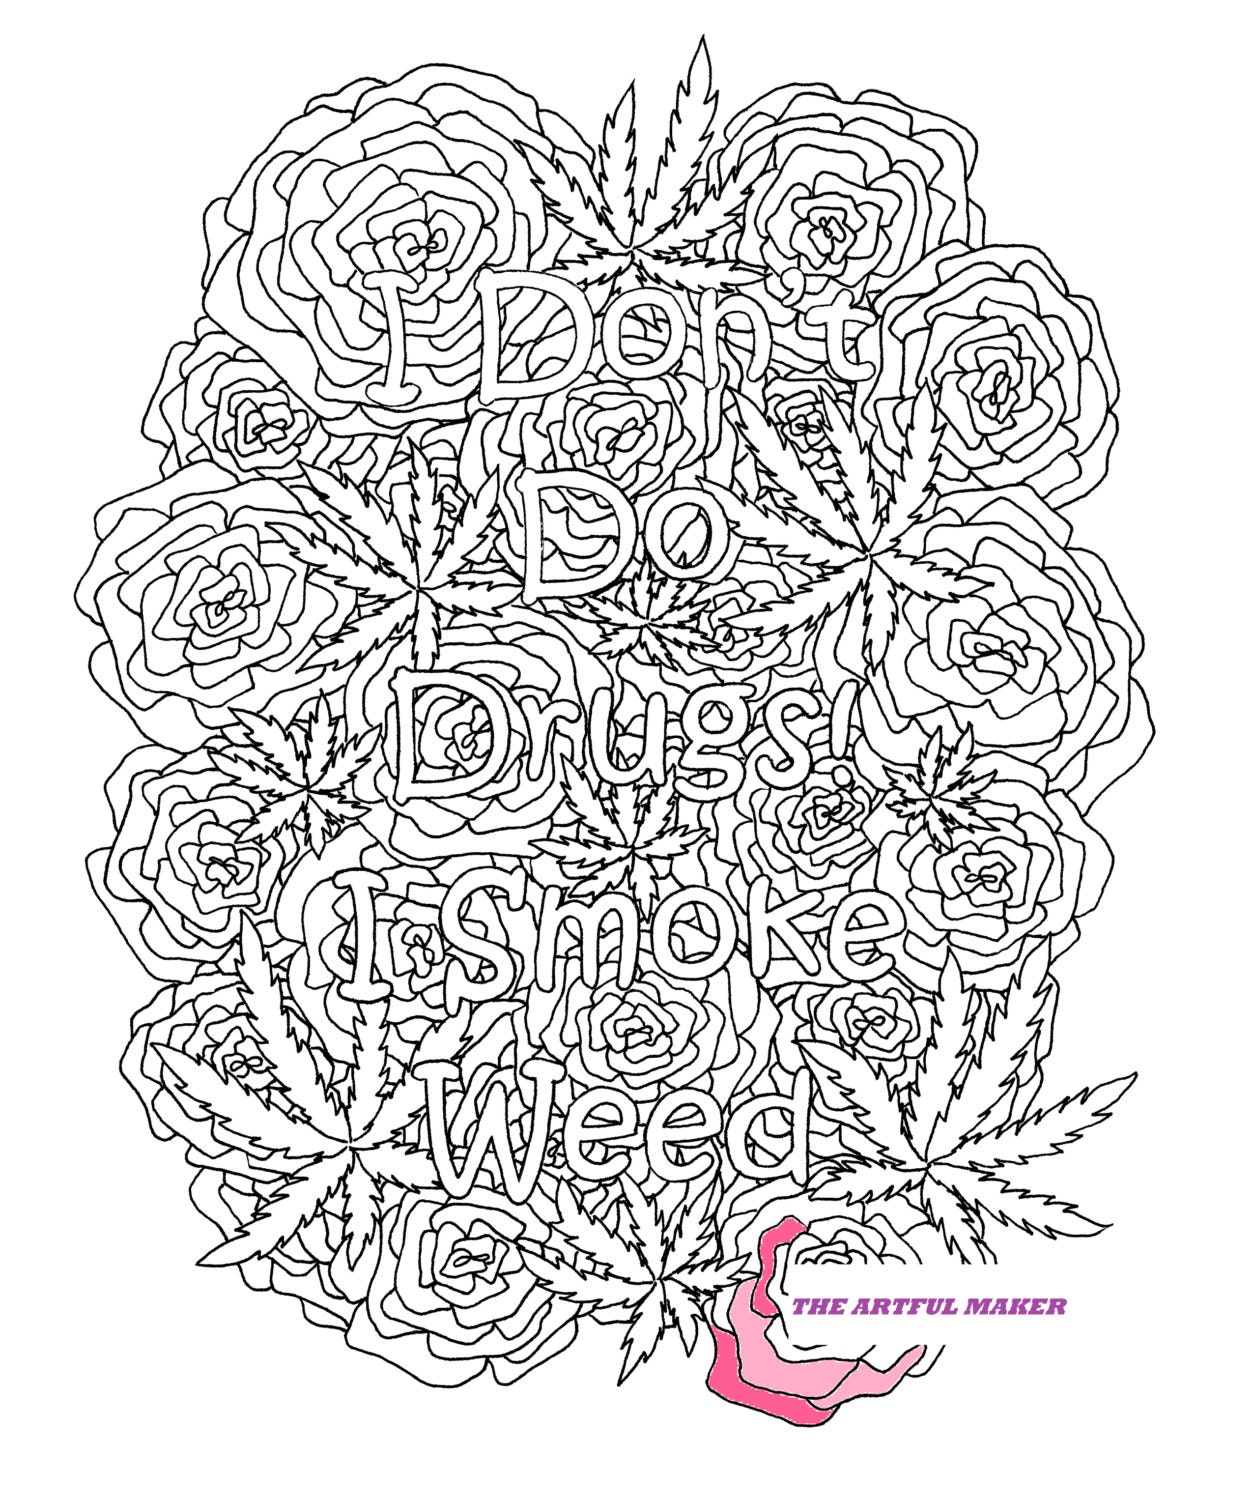 I Don't Do Drugs I Smoke Weed Adult Coloring Page by